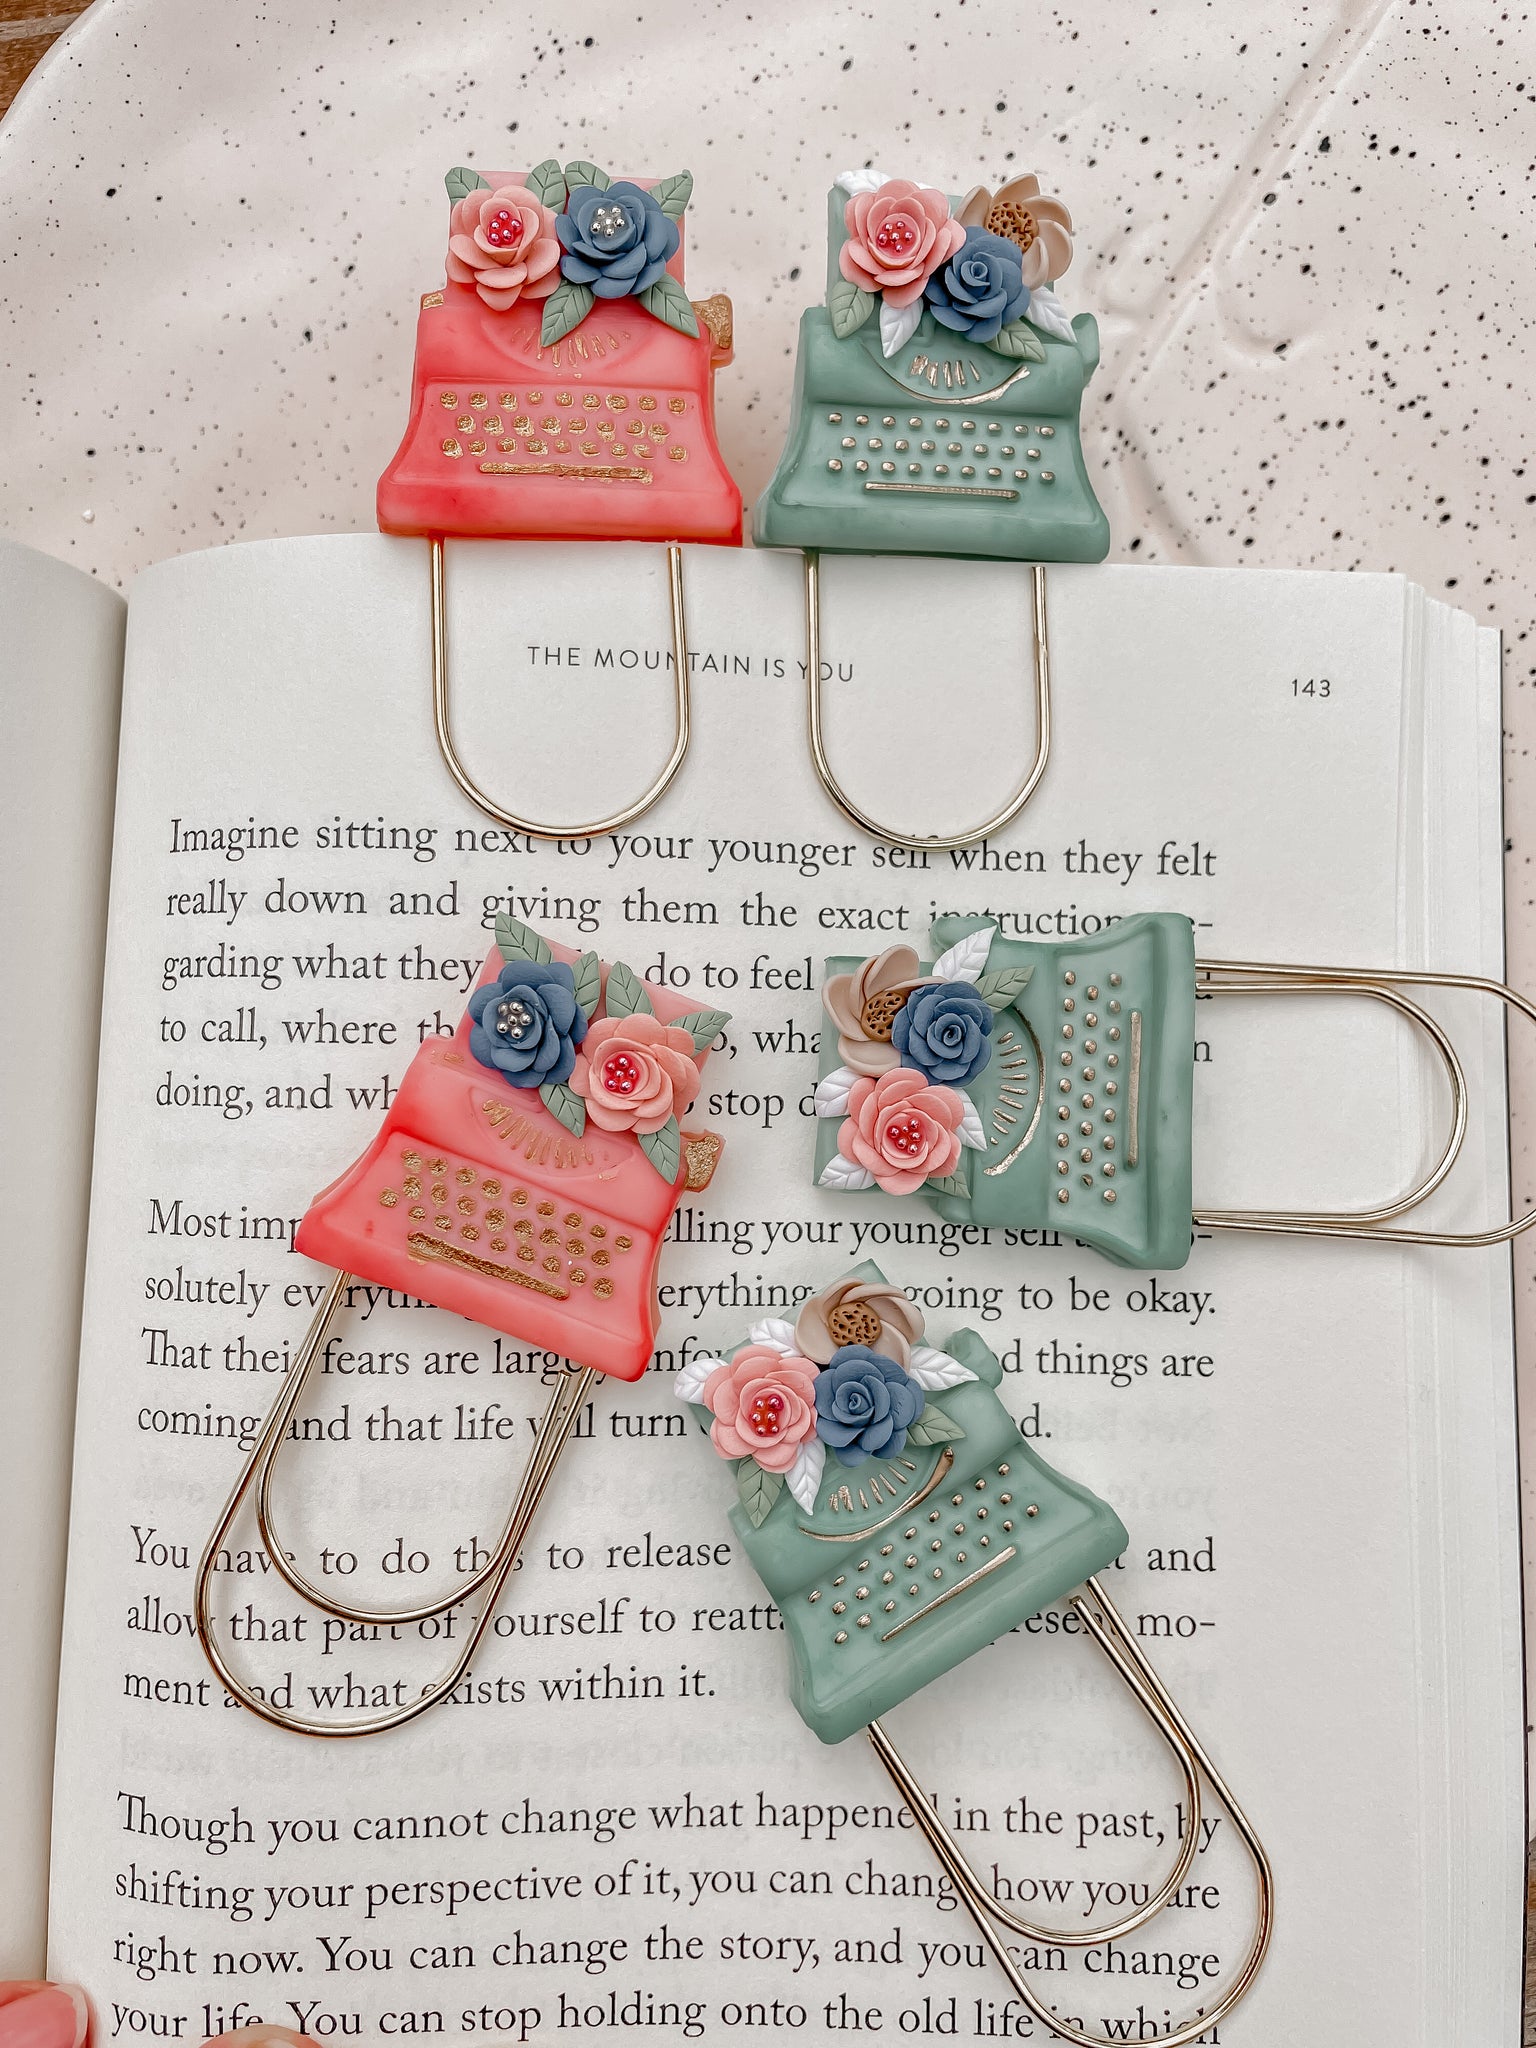 Floral Typewriter Earrings/Bookmarks paper clips